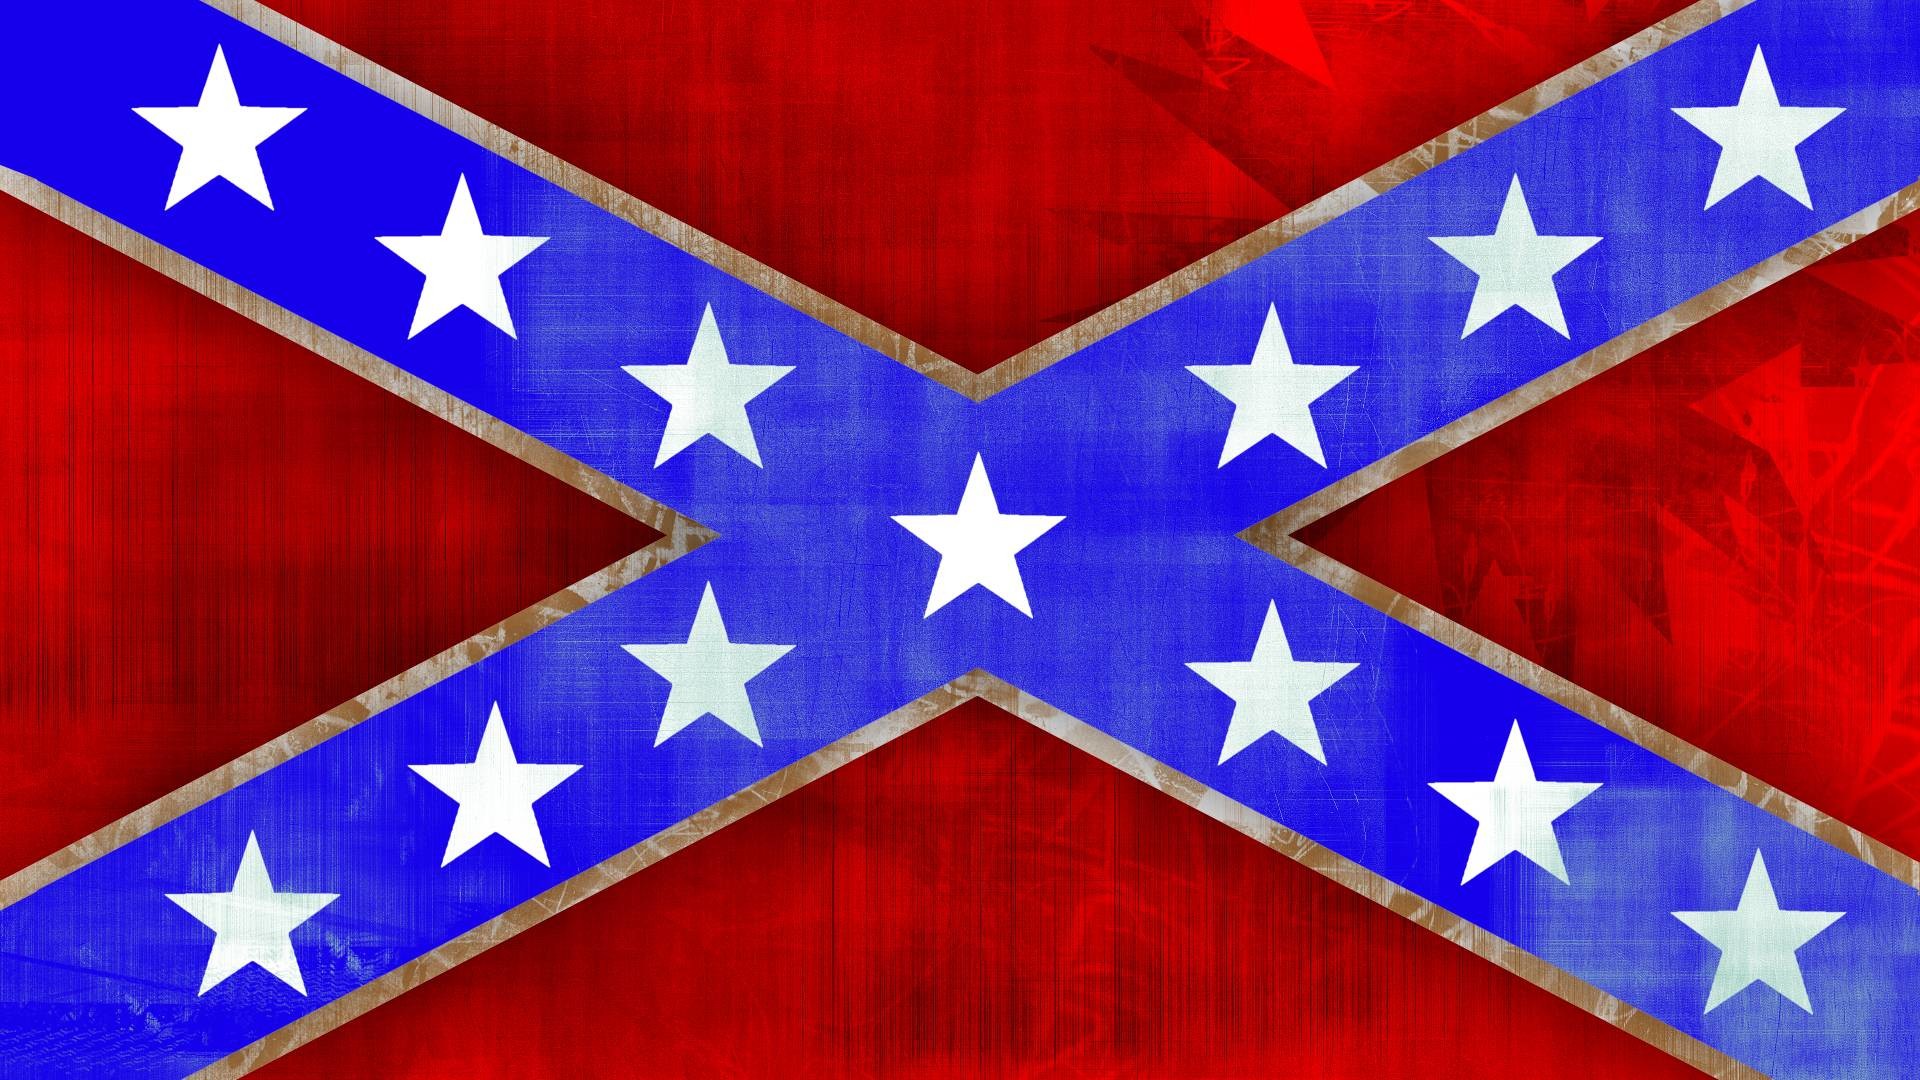 Cool Confederate Flag Wallpapers Images & Pictures – Becuo